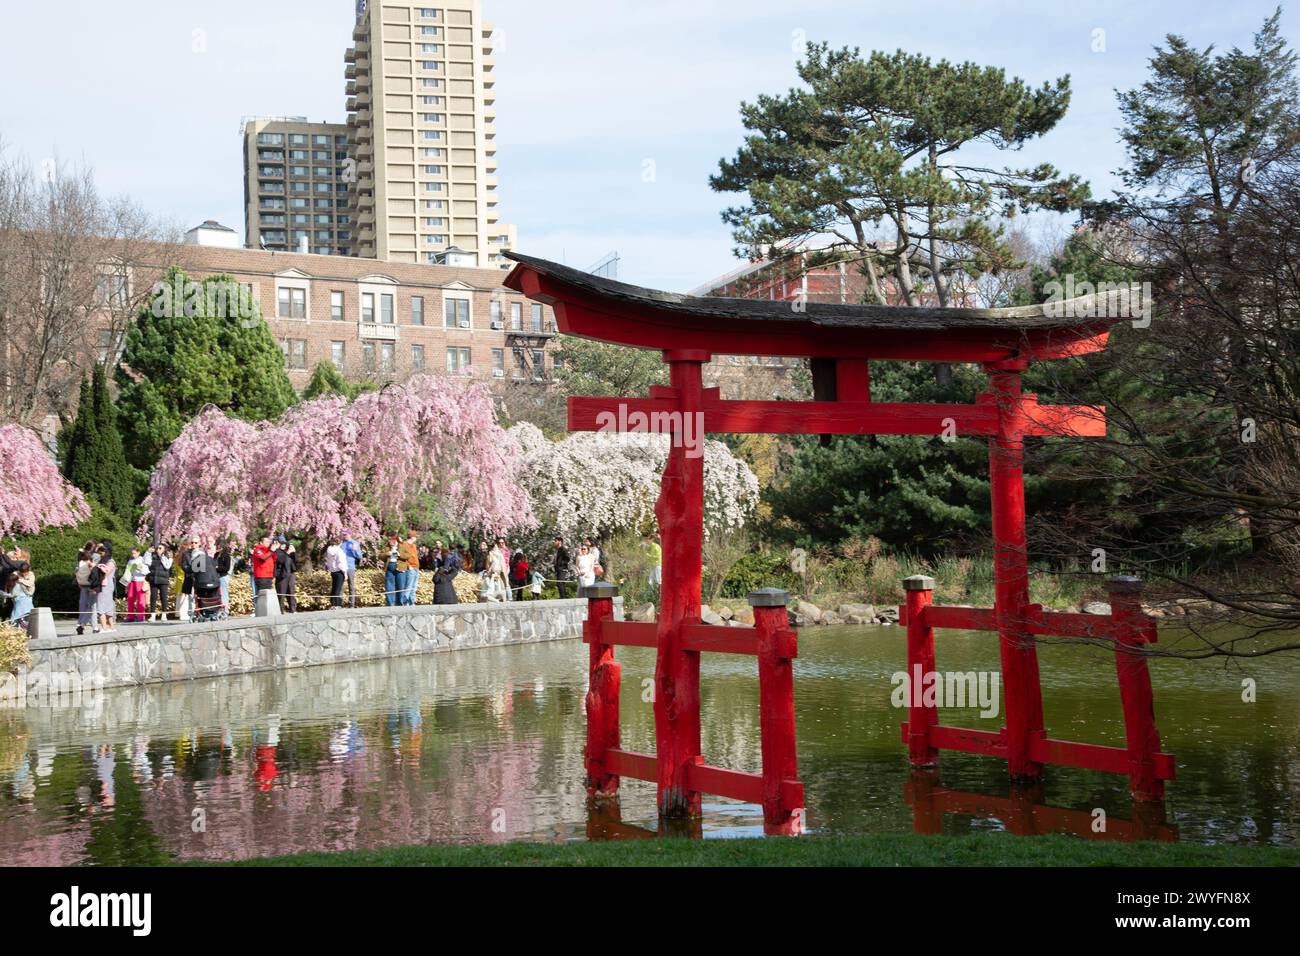 Early Spring at the Brooklyn Botanic Garden on Easter Sunday. Visitors enjoy the Higan cherries in bloom at the Japanese Garden and pond. Stock Photo